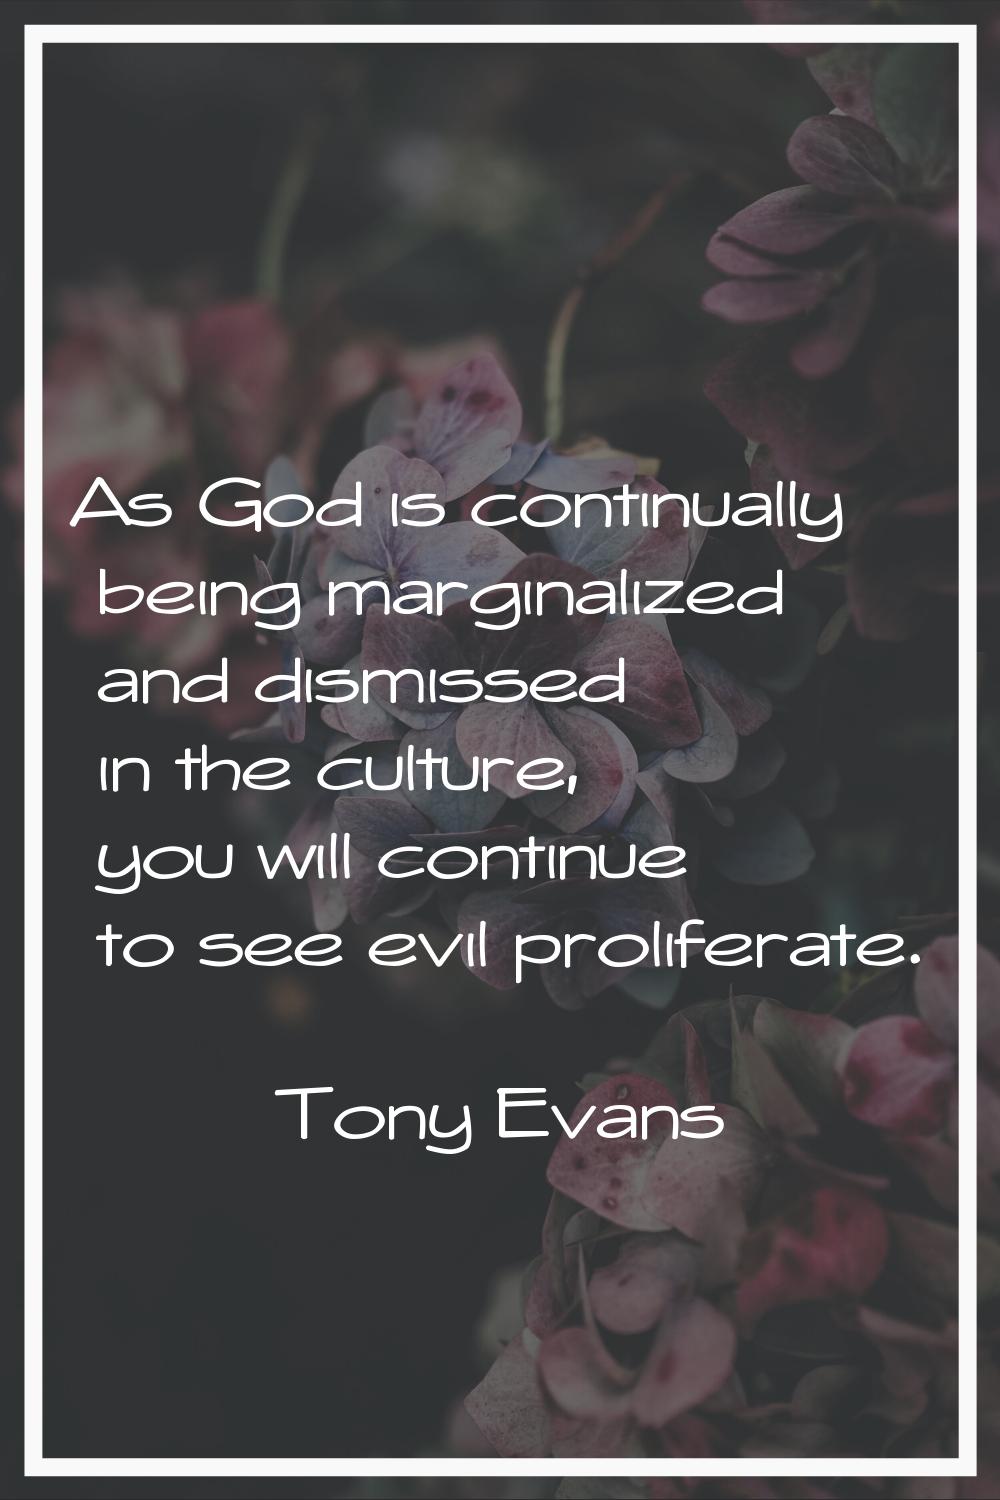 As God is continually being marginalized and dismissed in the culture, you will continue to see evi